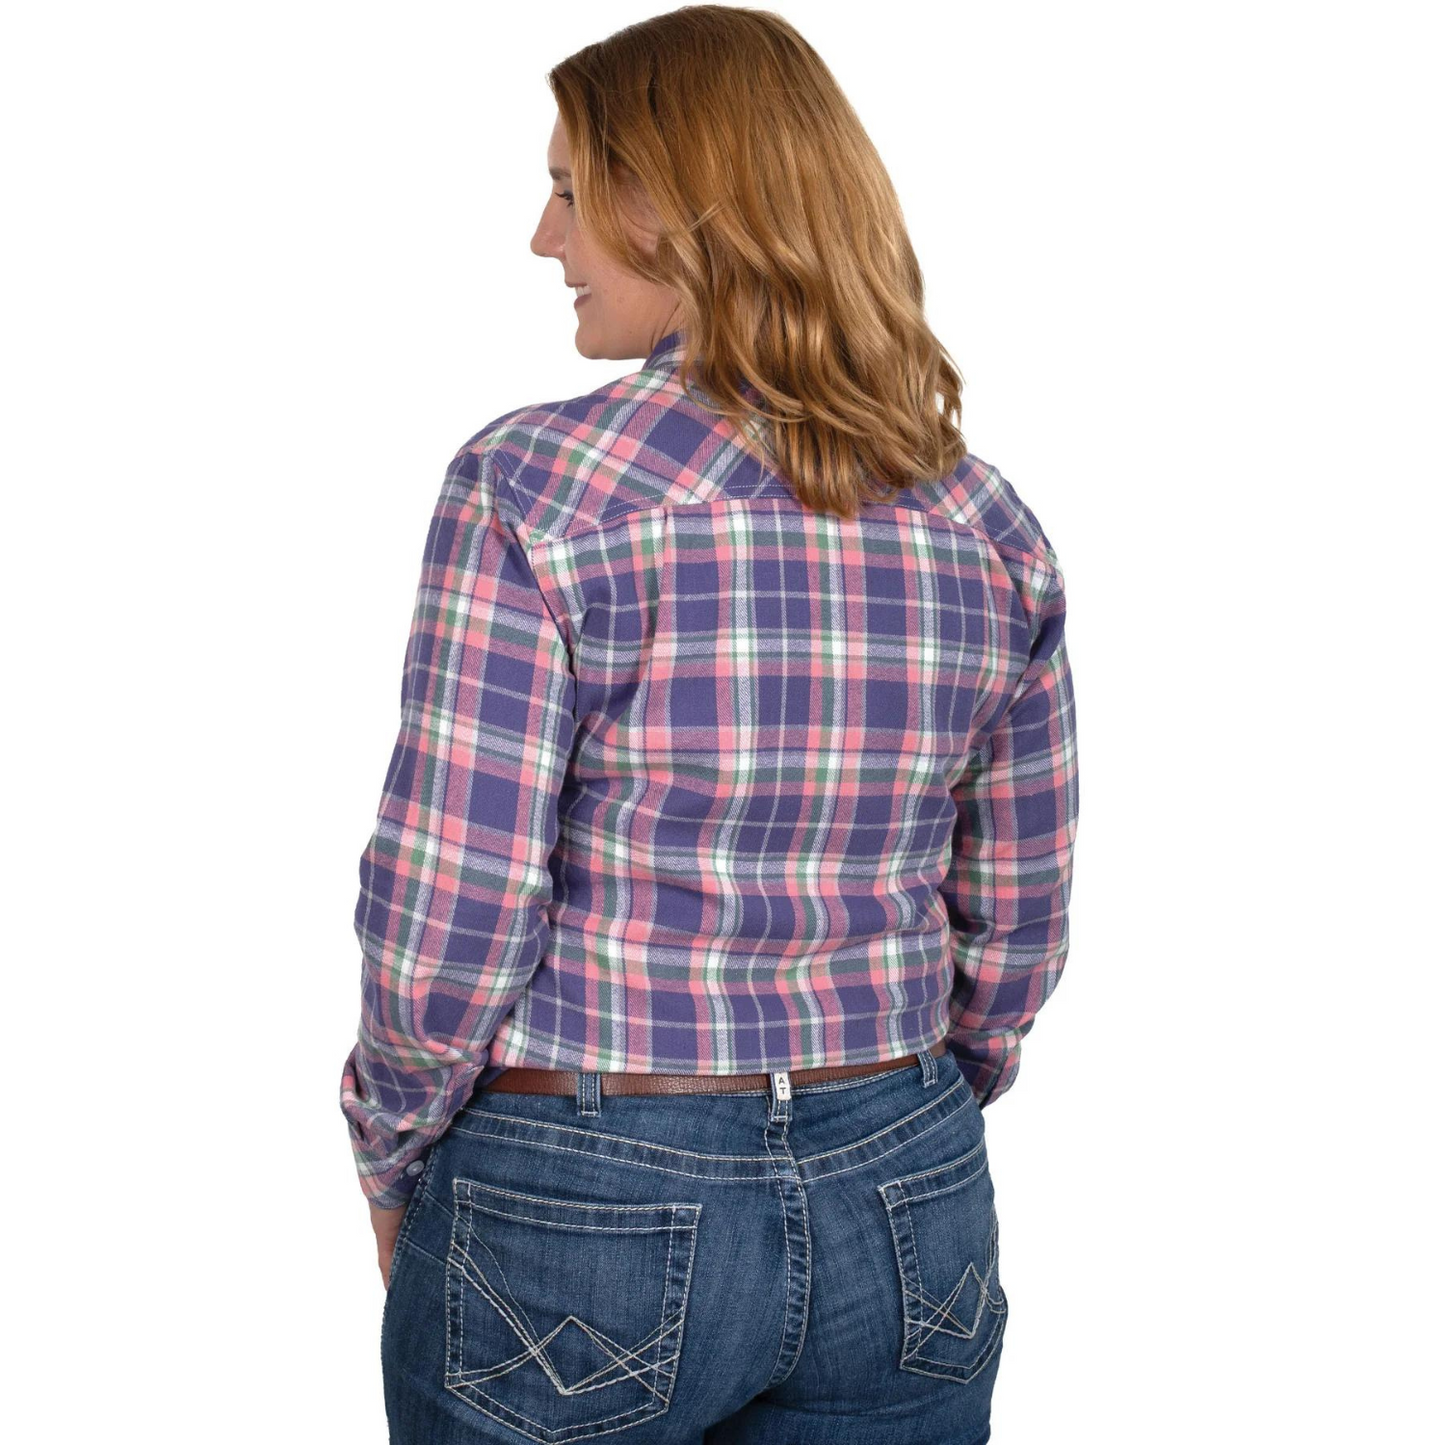 Just Country Womens Brooke Flannel Shirt